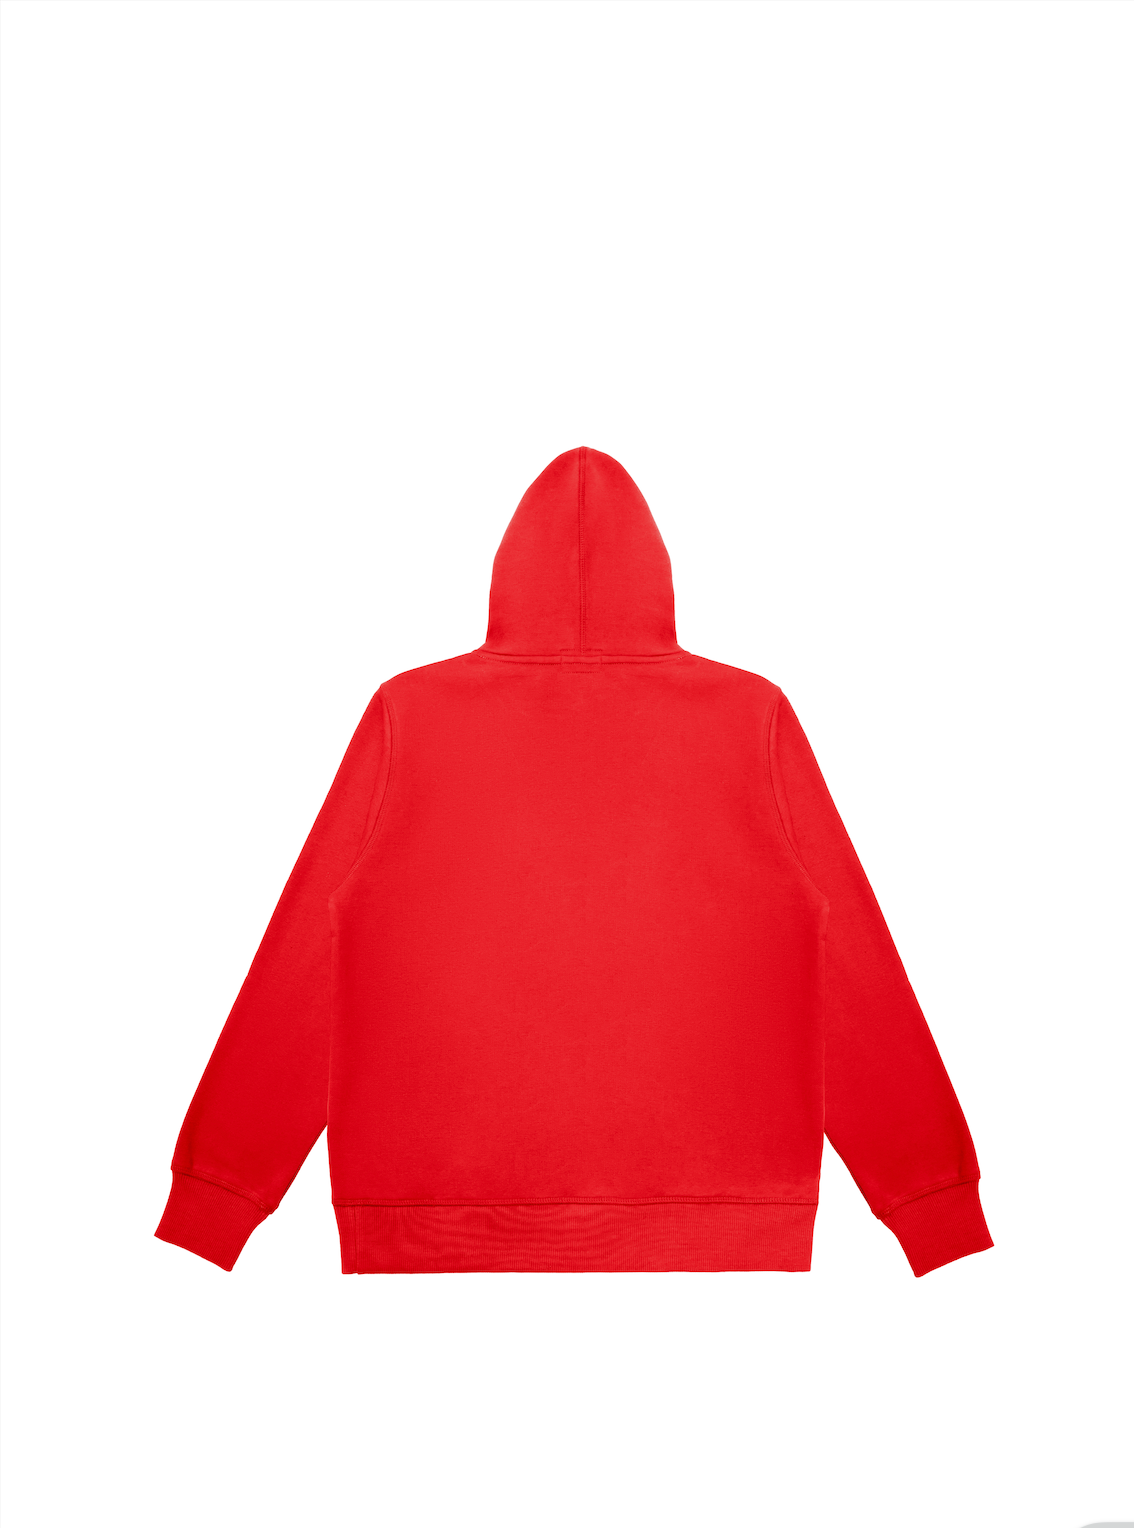 LAX World X Lusa 1904 Red Lacrosse Pullover Hoodie - Red Front 